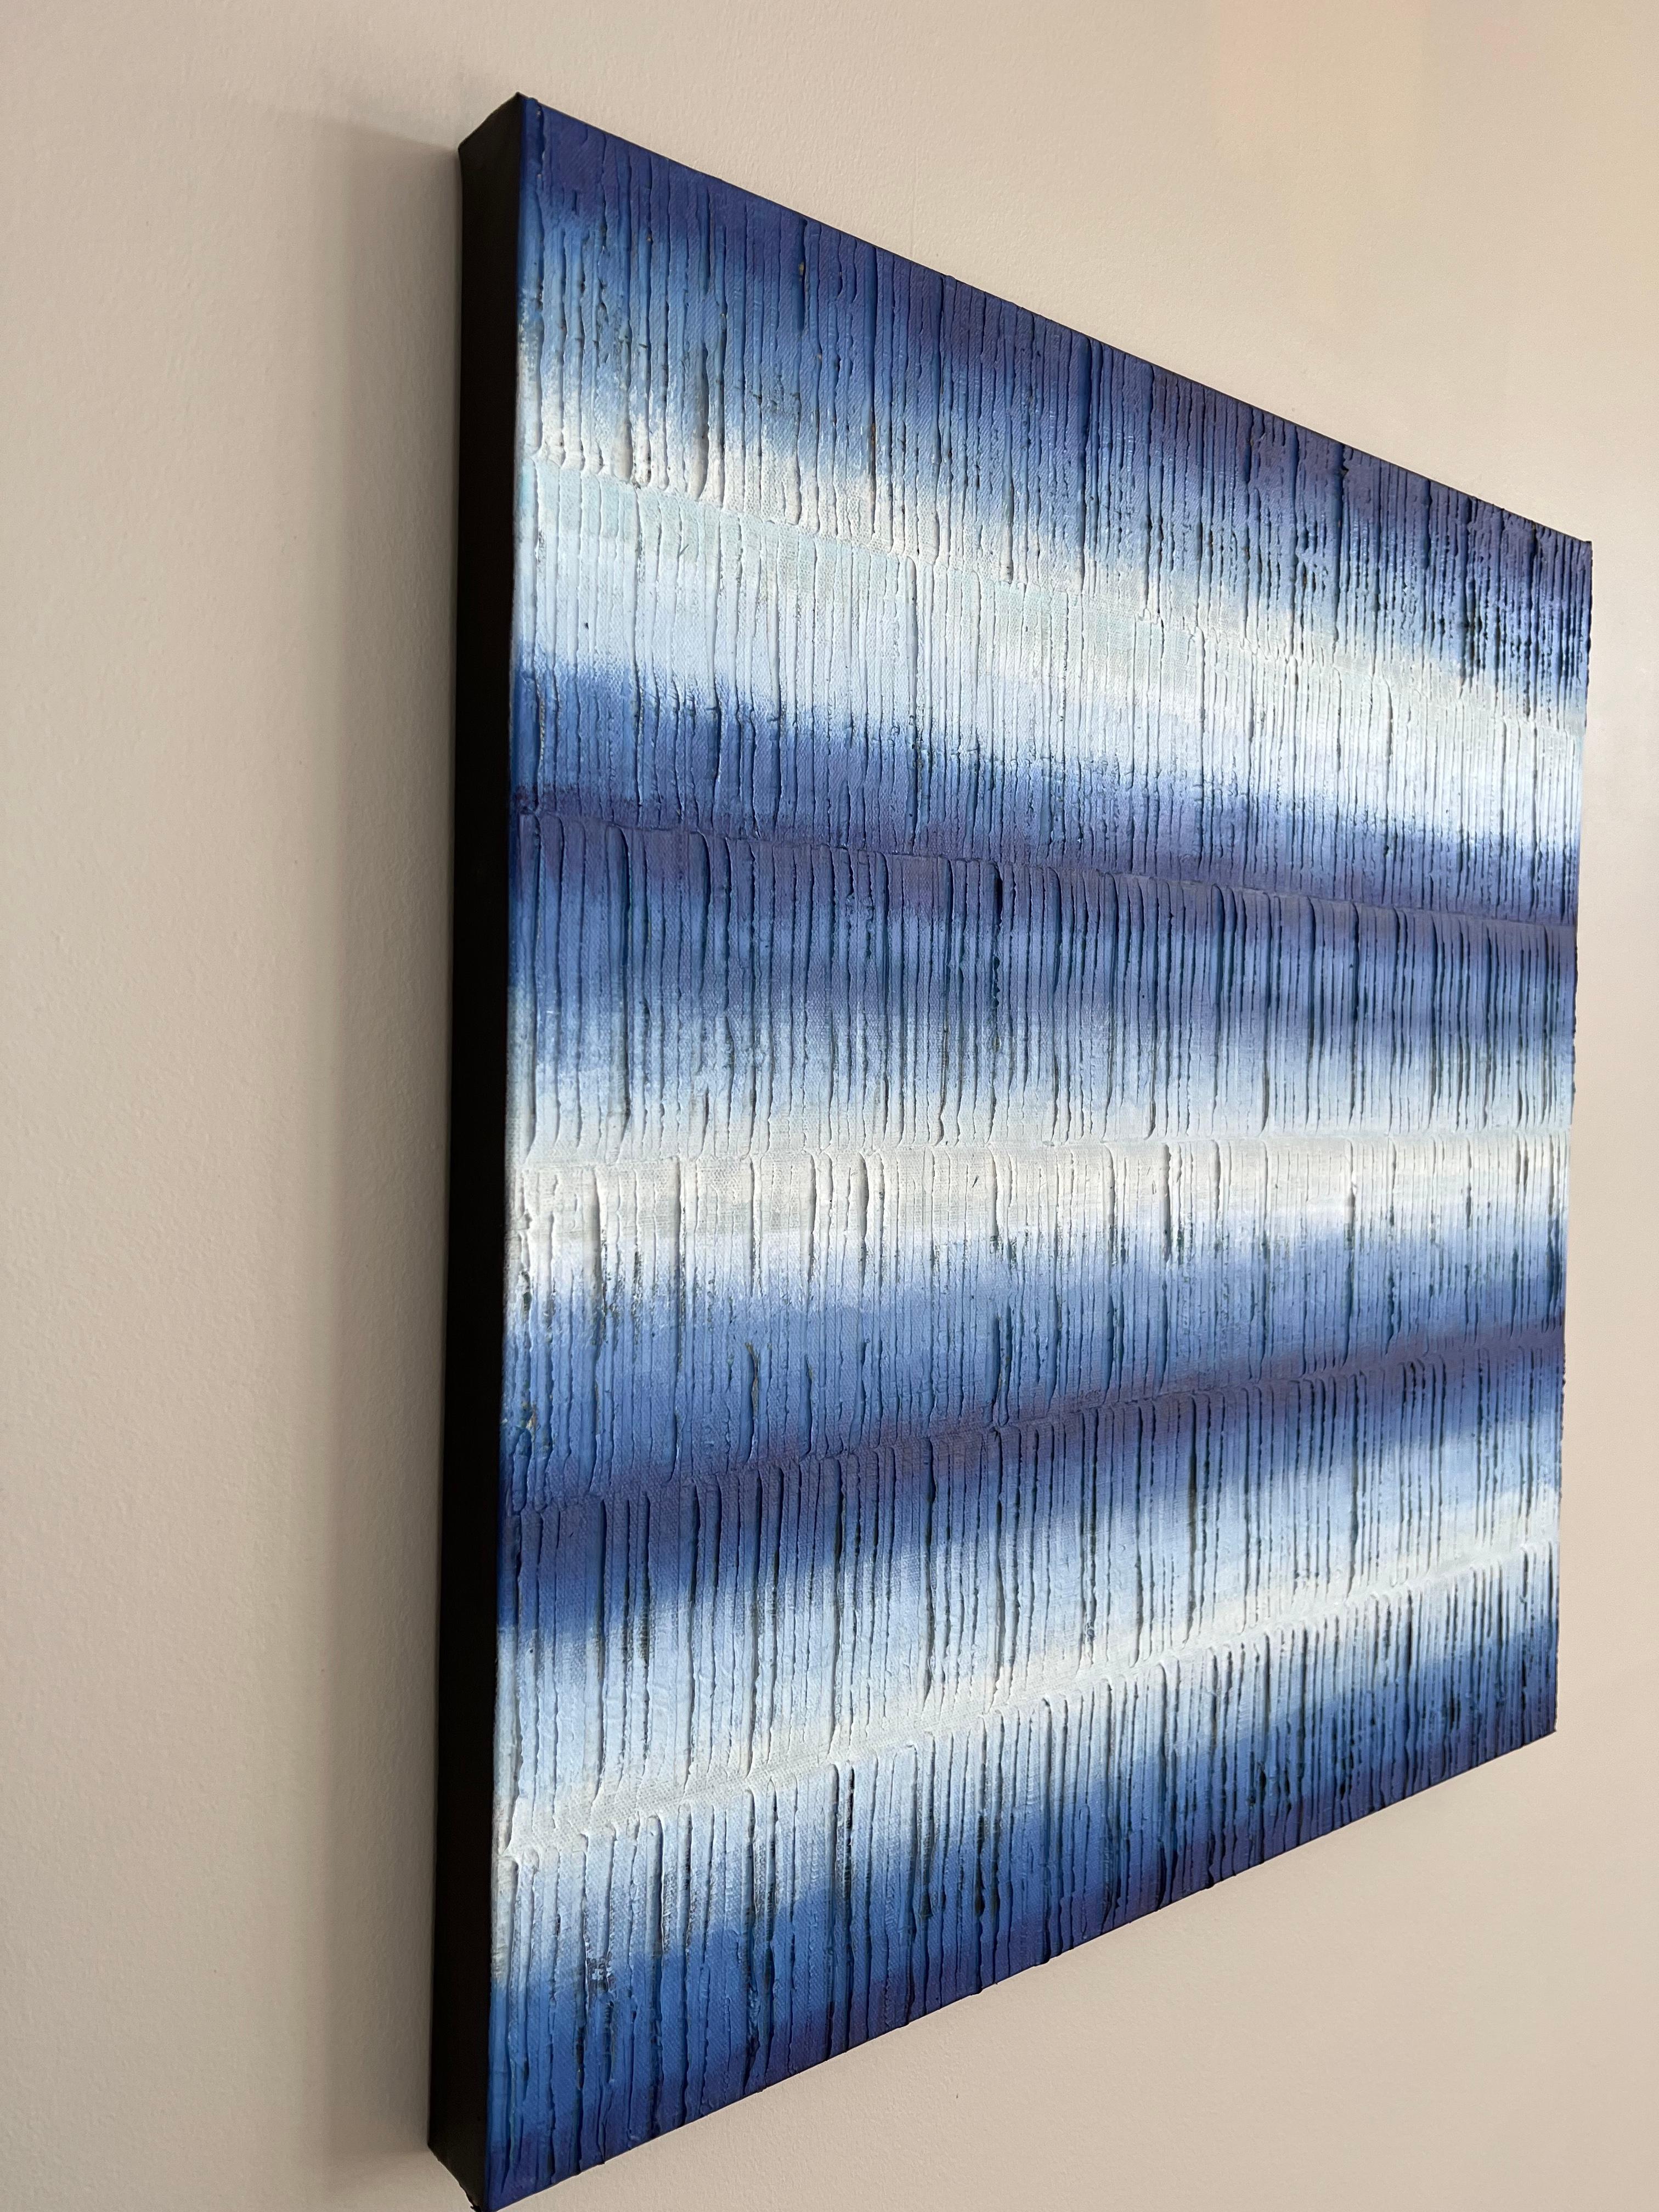 <p>Artist Comments<br>Artist Janet Hamilton depicts an intricately textured abstract painting with rich gradations of color. She paints vivid indigo rays, elegantly meeting pristine white, creating bands of soothing hues. Structured frequencies of